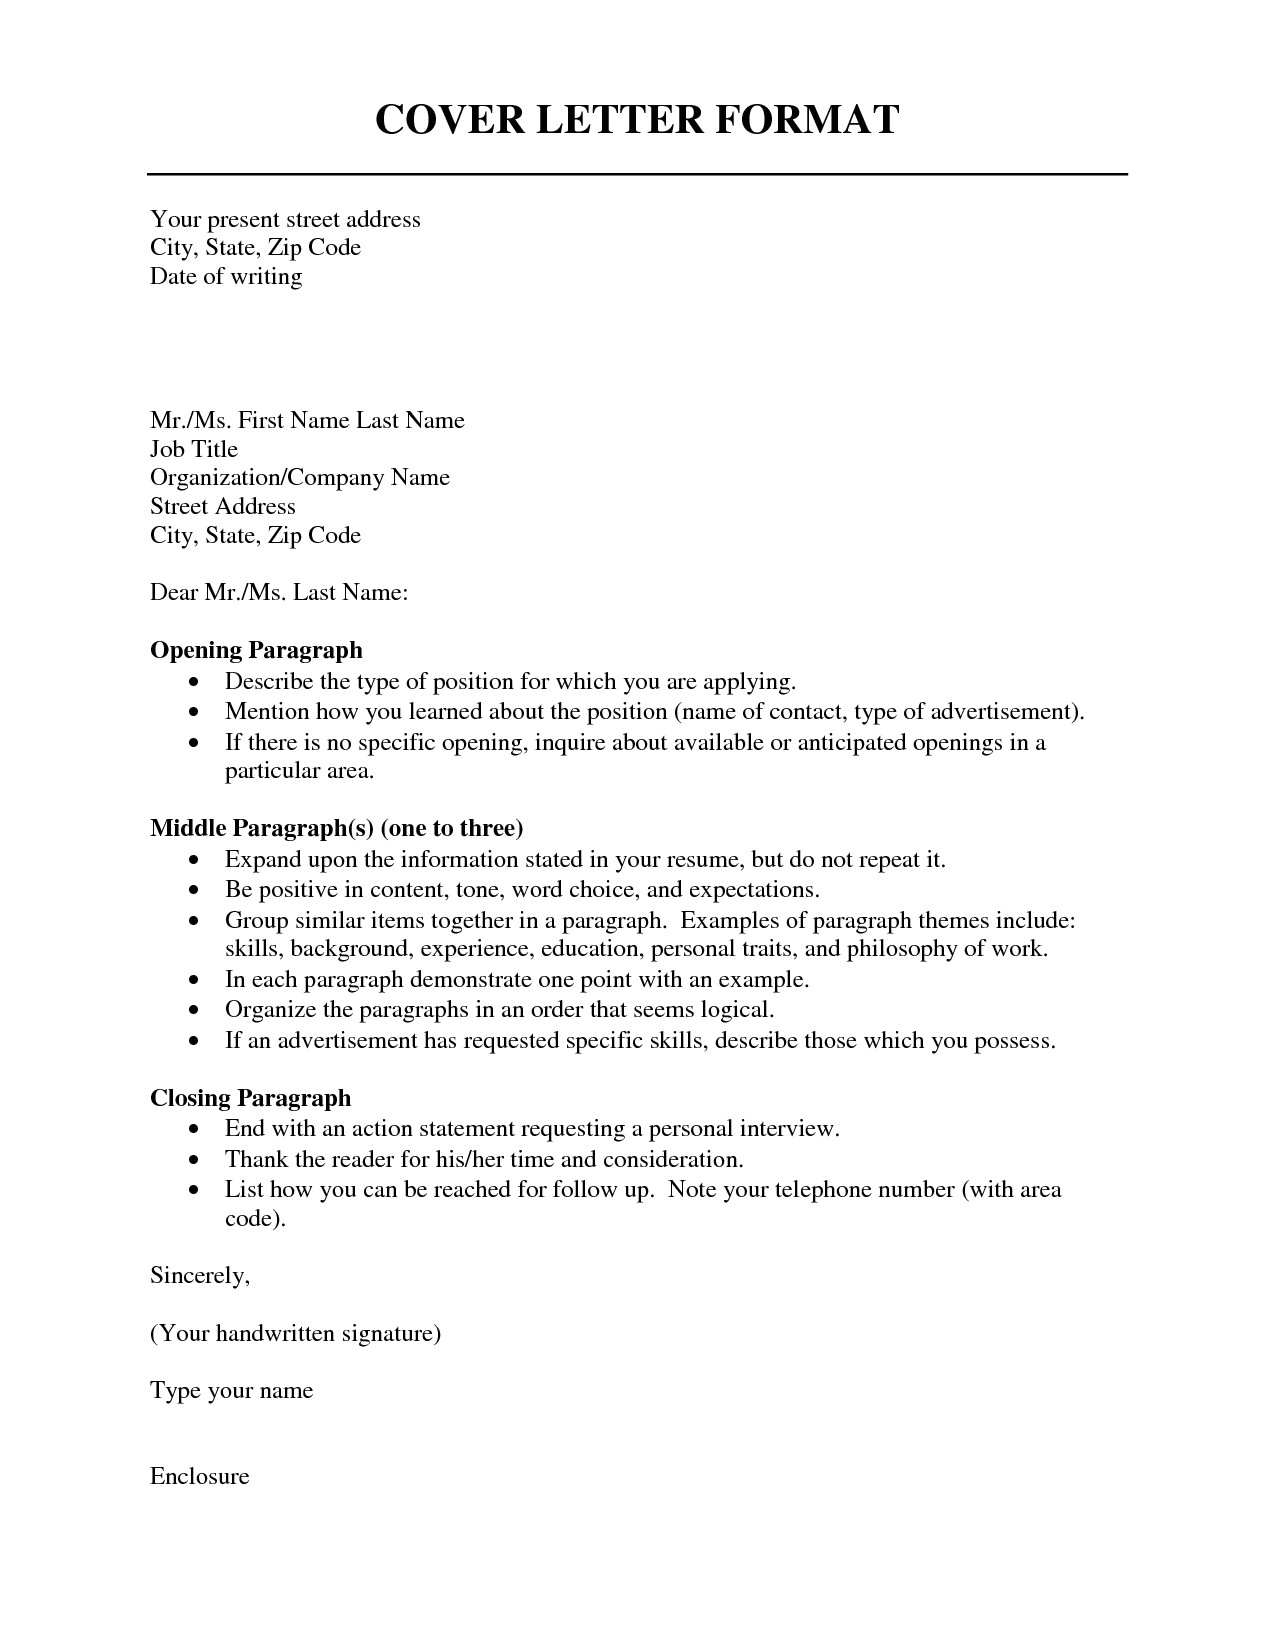 formatting for cover letter